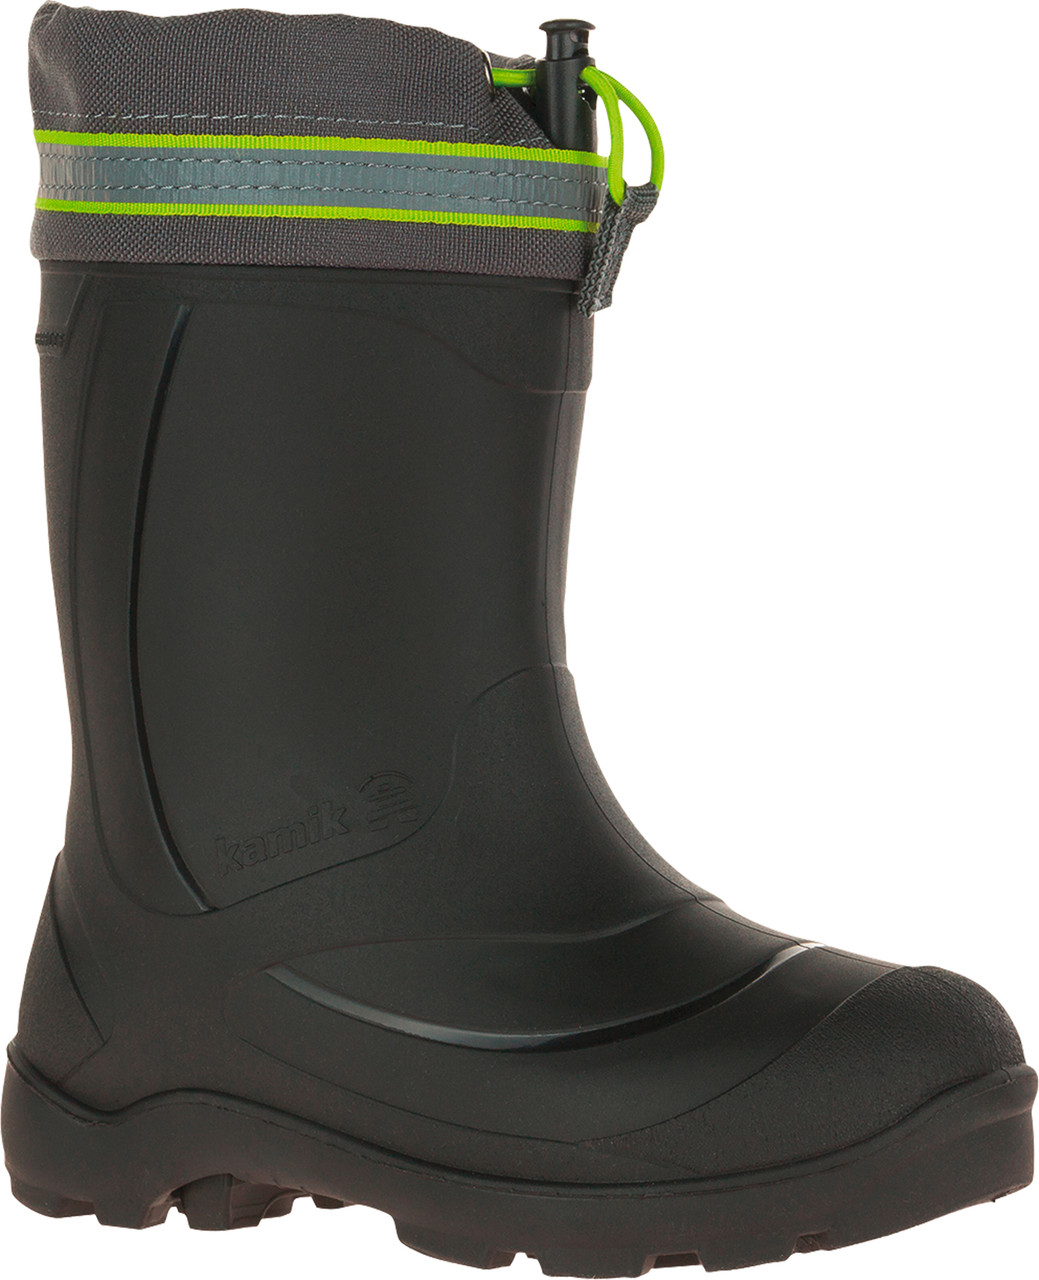 Kamik Snobuster 3 Reflective Boots - Children to Youths | MEC